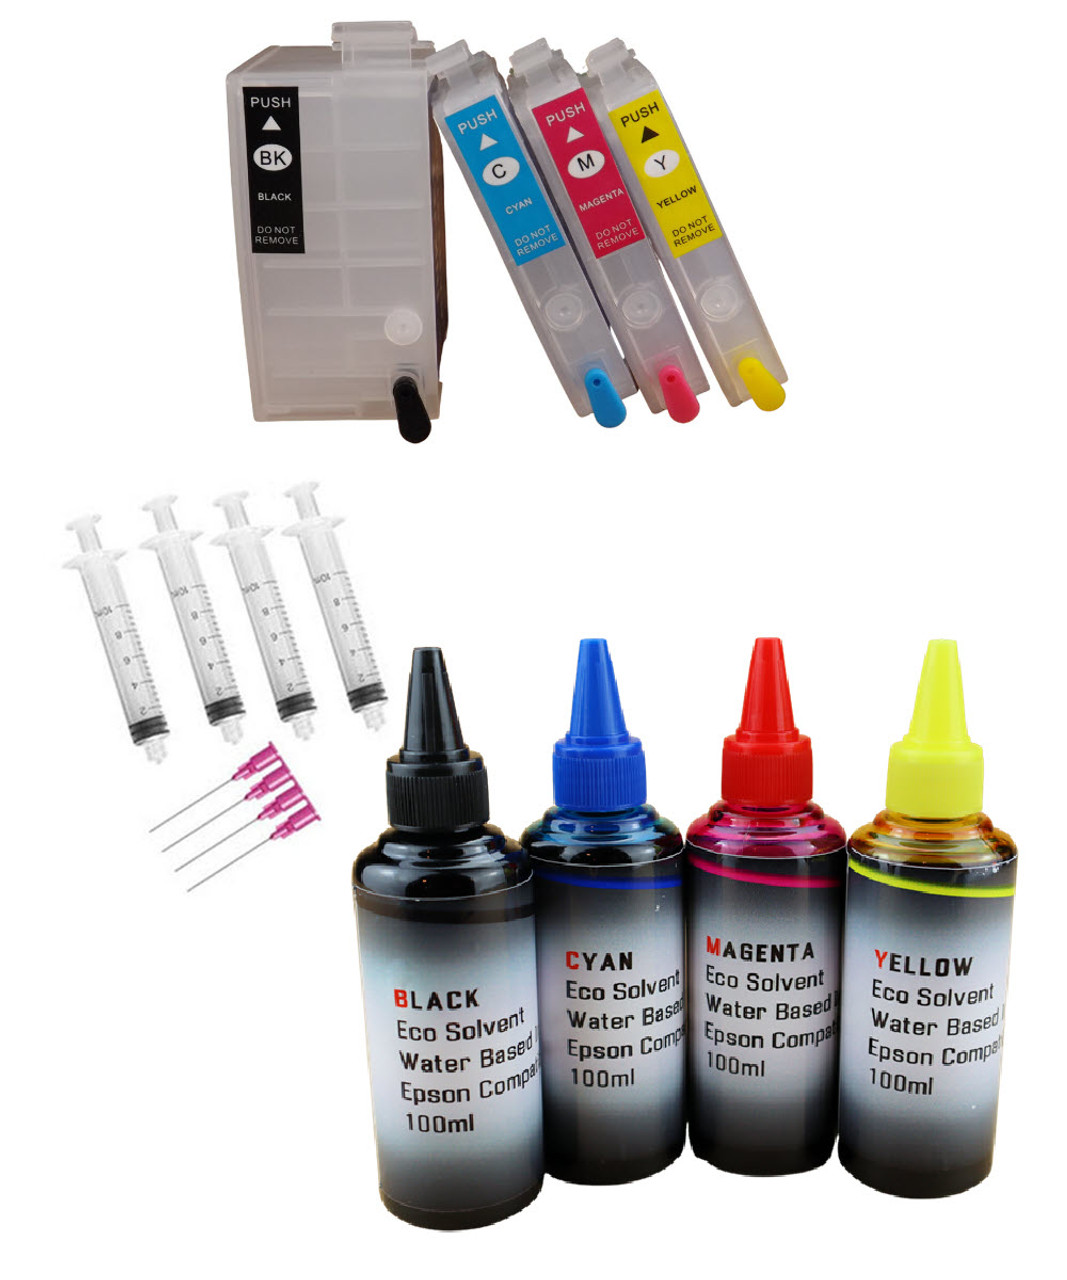 Water Based Eco Solvent Ink 4- 100ml Bottles 4- Refillable Ink Cartridges with auto reset chips for WorkForce WF-7110 WF-7610 WF-7620 Printers